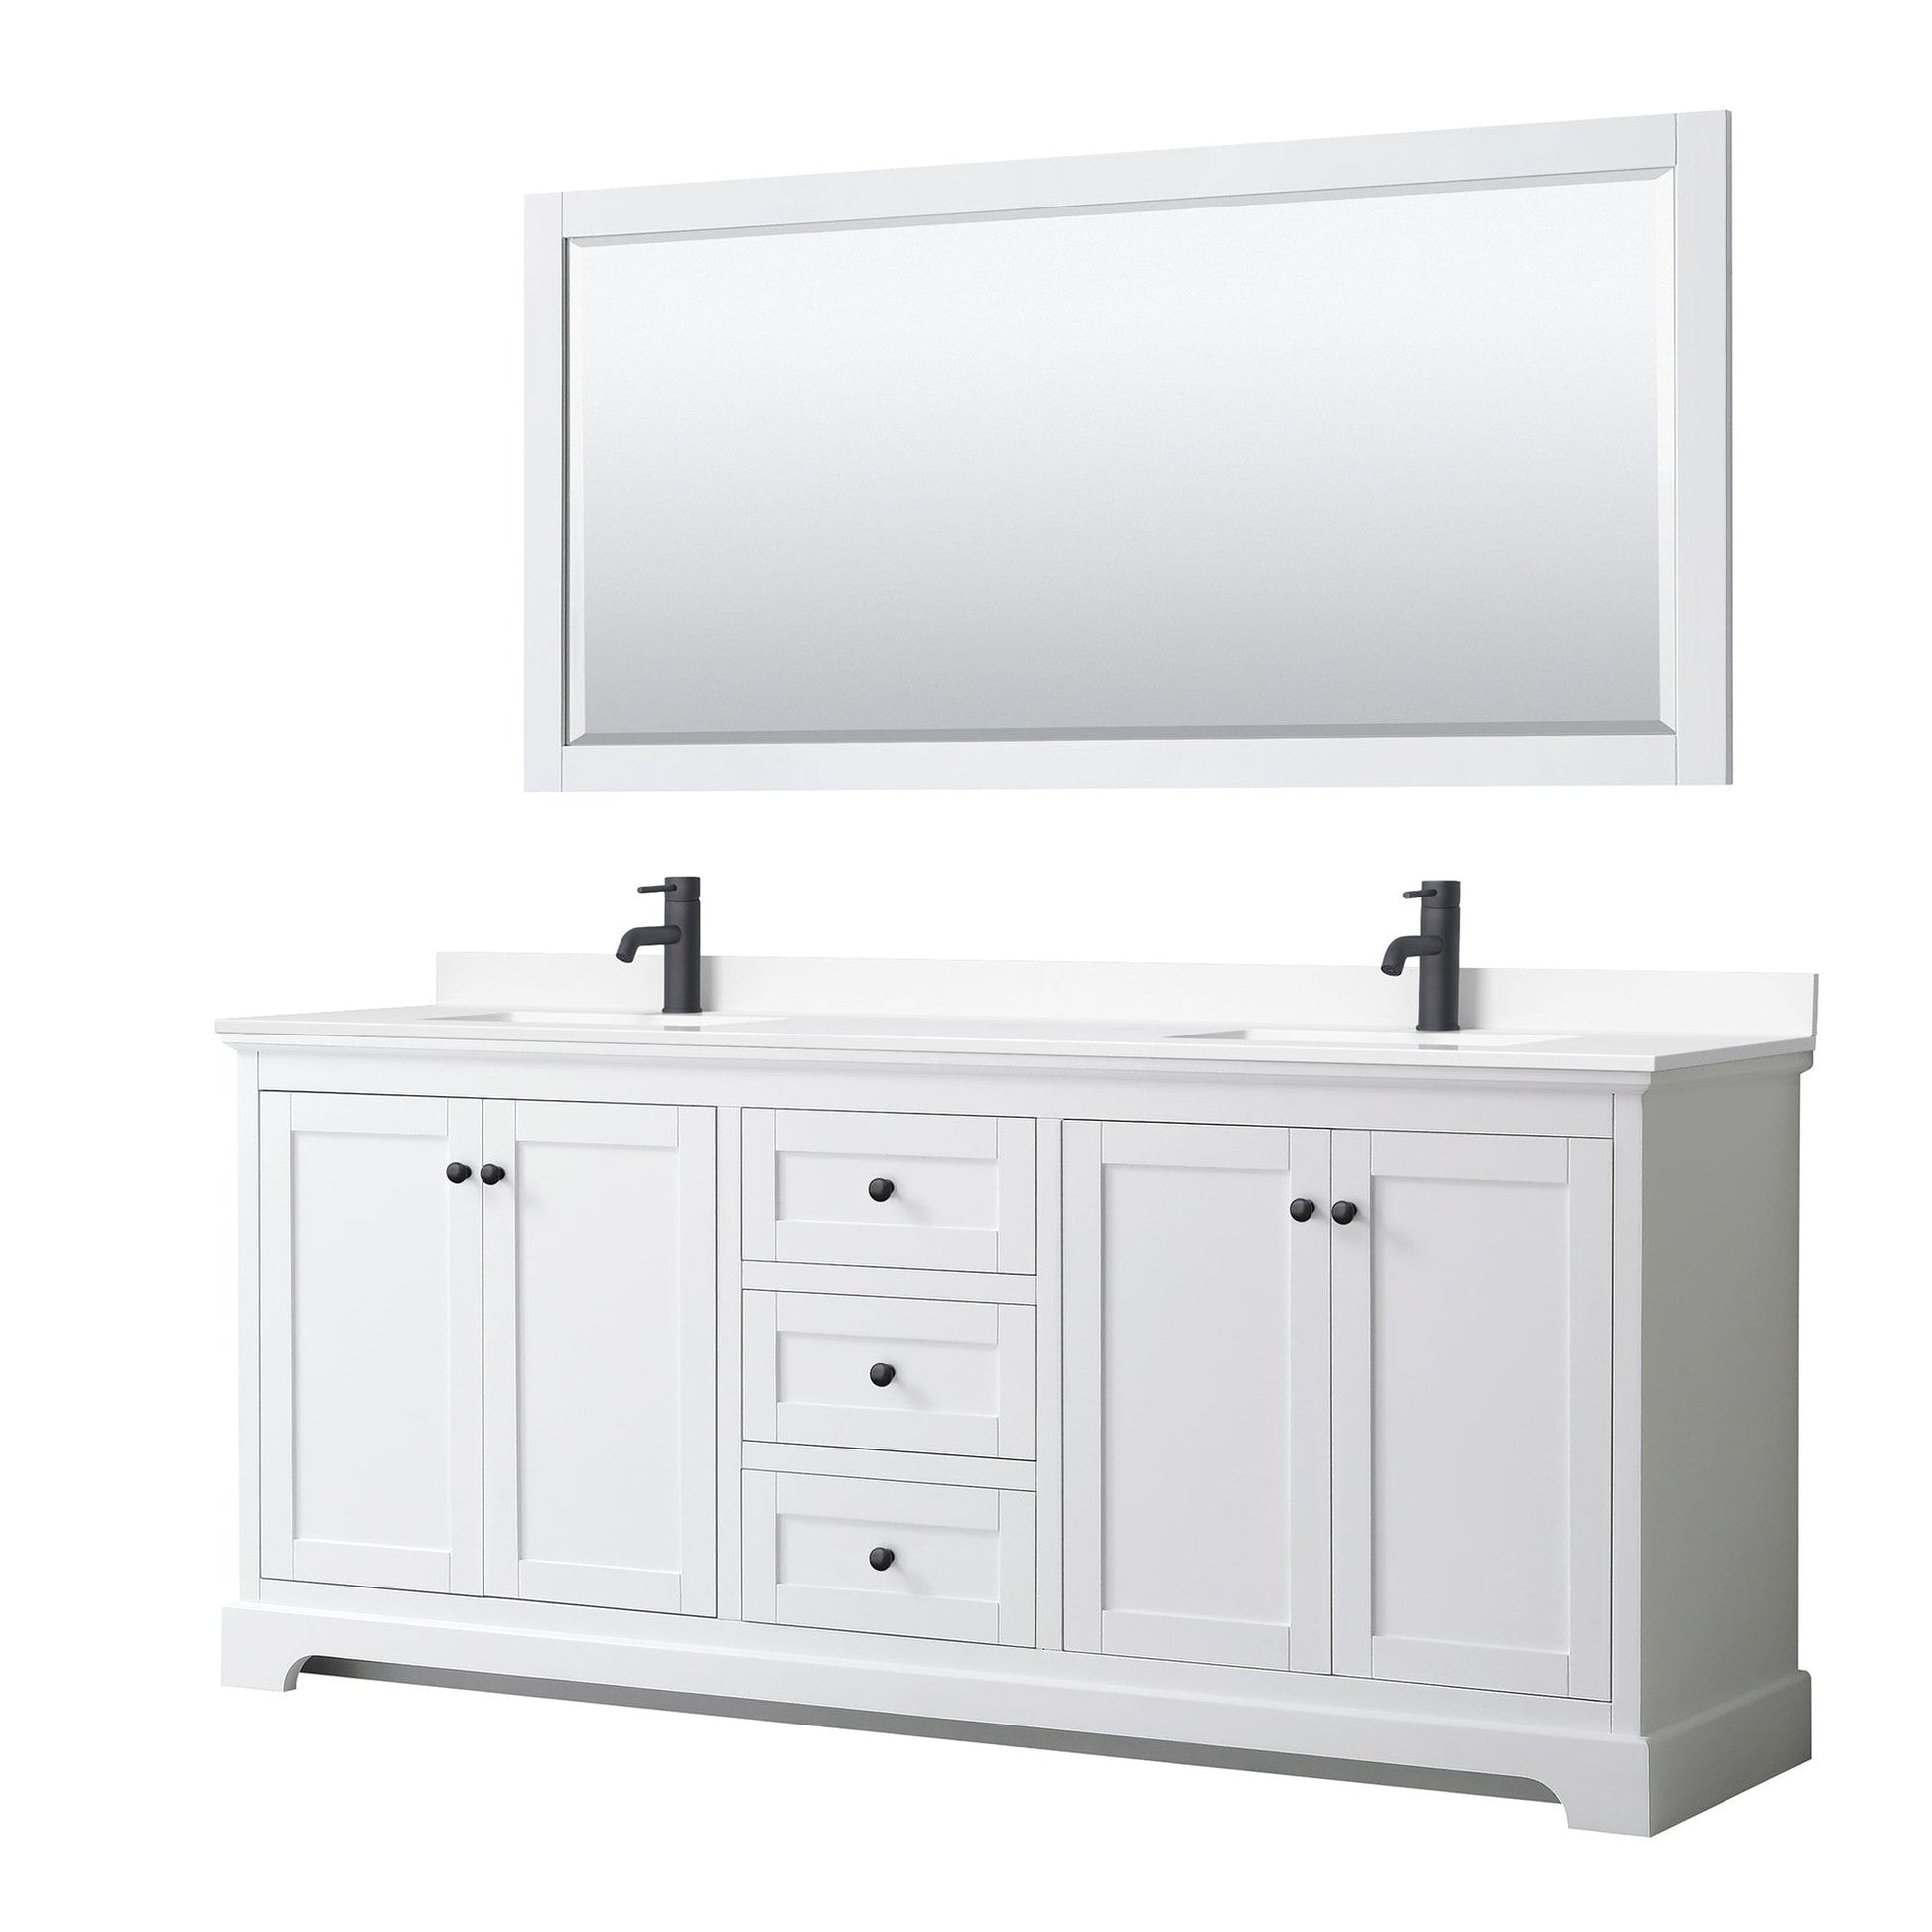 Avery 80" Double Bathroom Vanity in White, White Cultured Marble Countertop, Undermount Square Sinks, Matte Black Trim, 70" Mirror